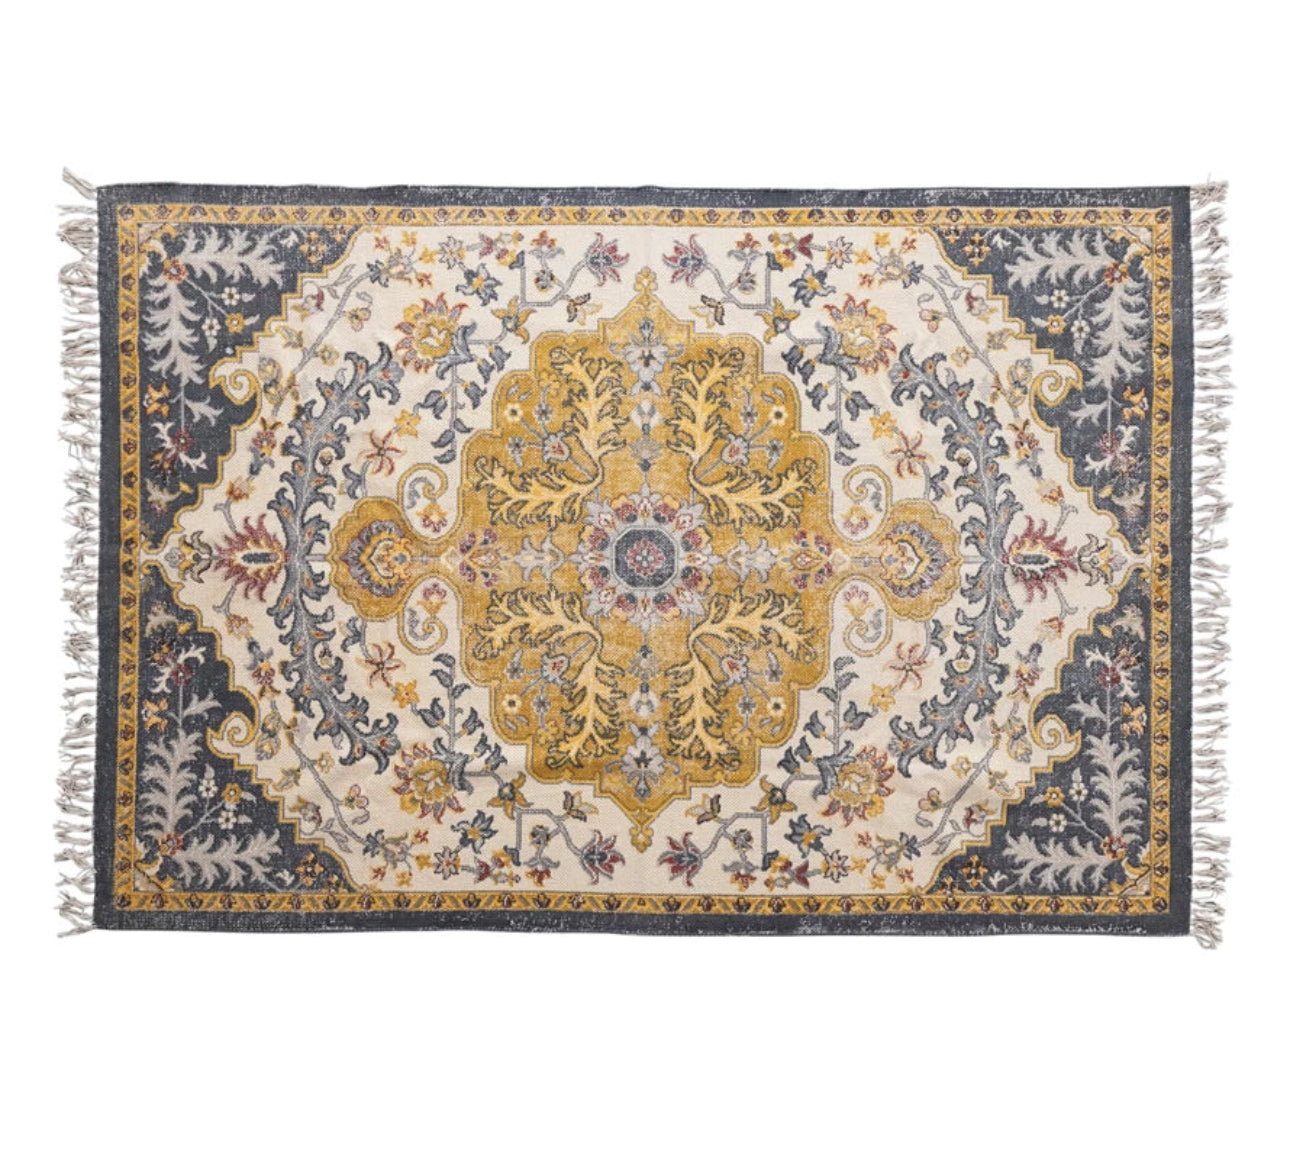 Woven Cotton Distressed Print Rug